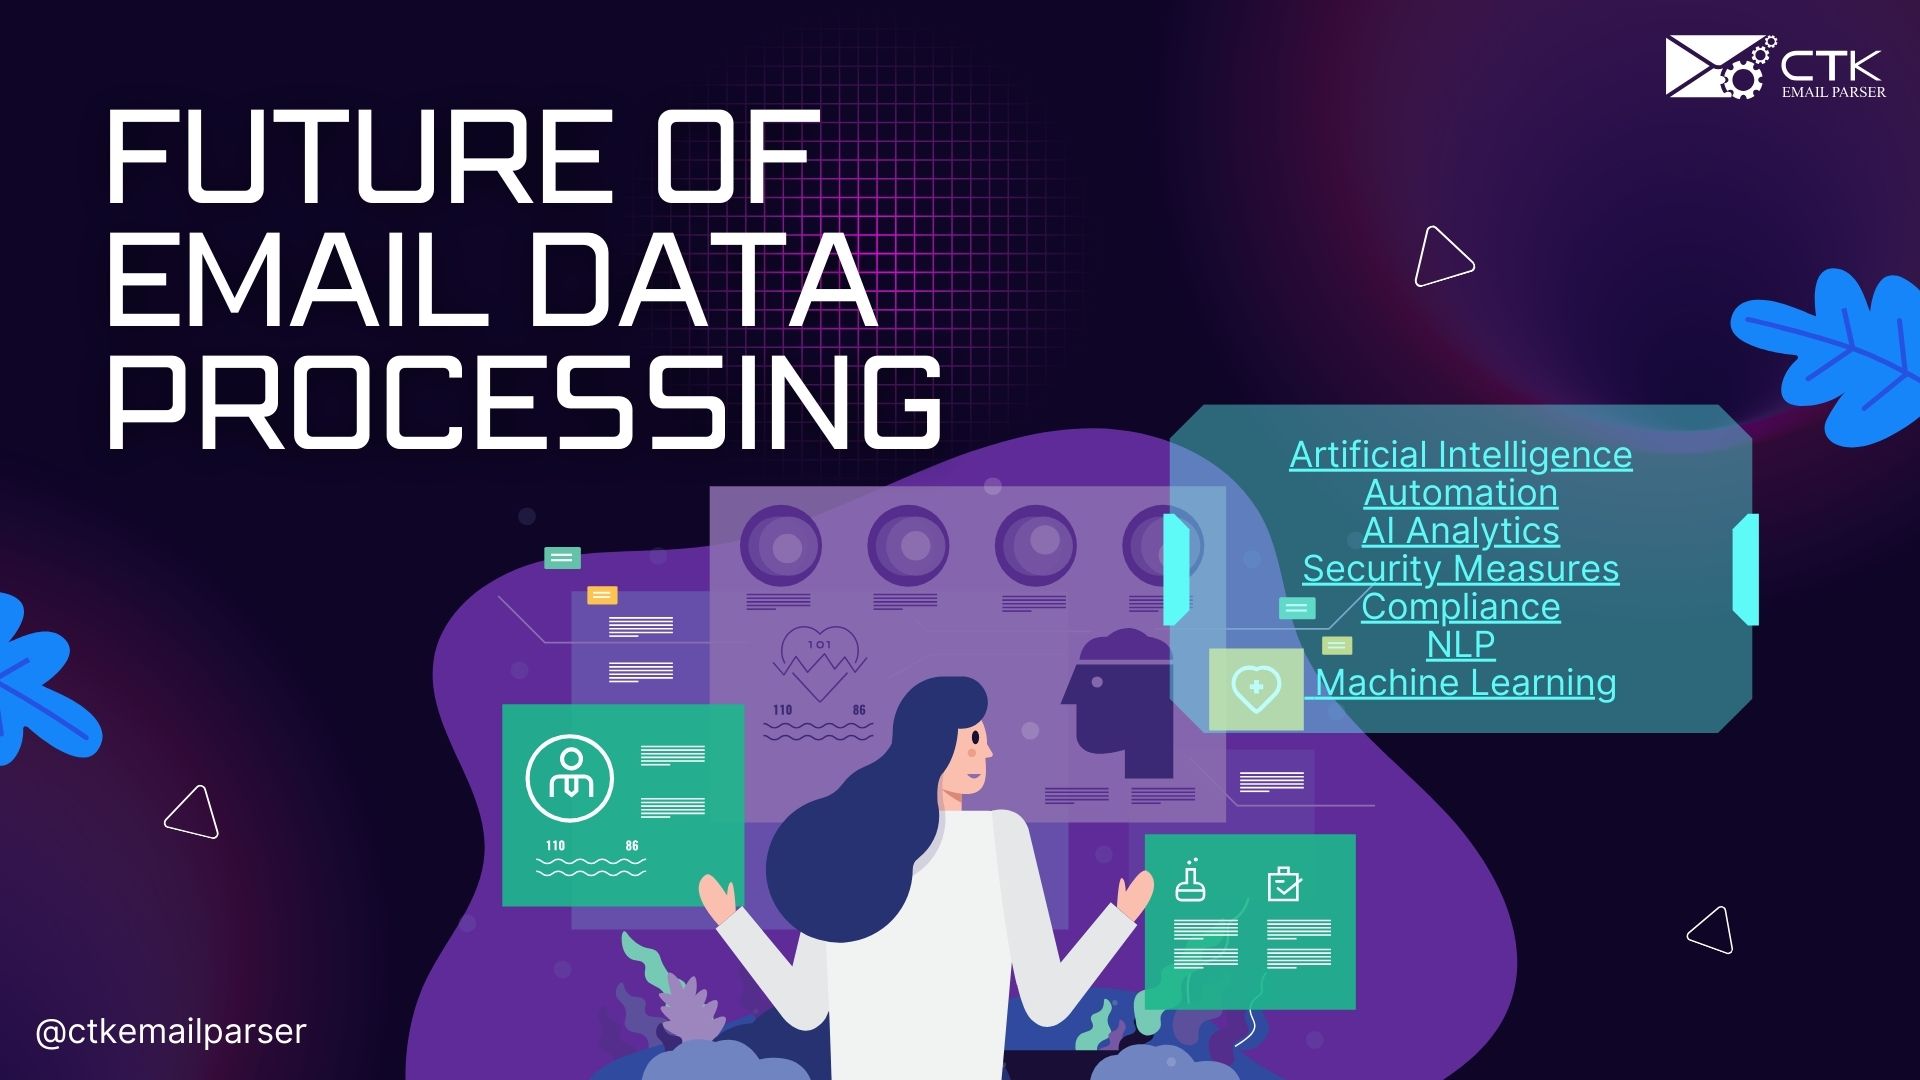 A Feature image for the blog topic "The Future of Email Data Processing"